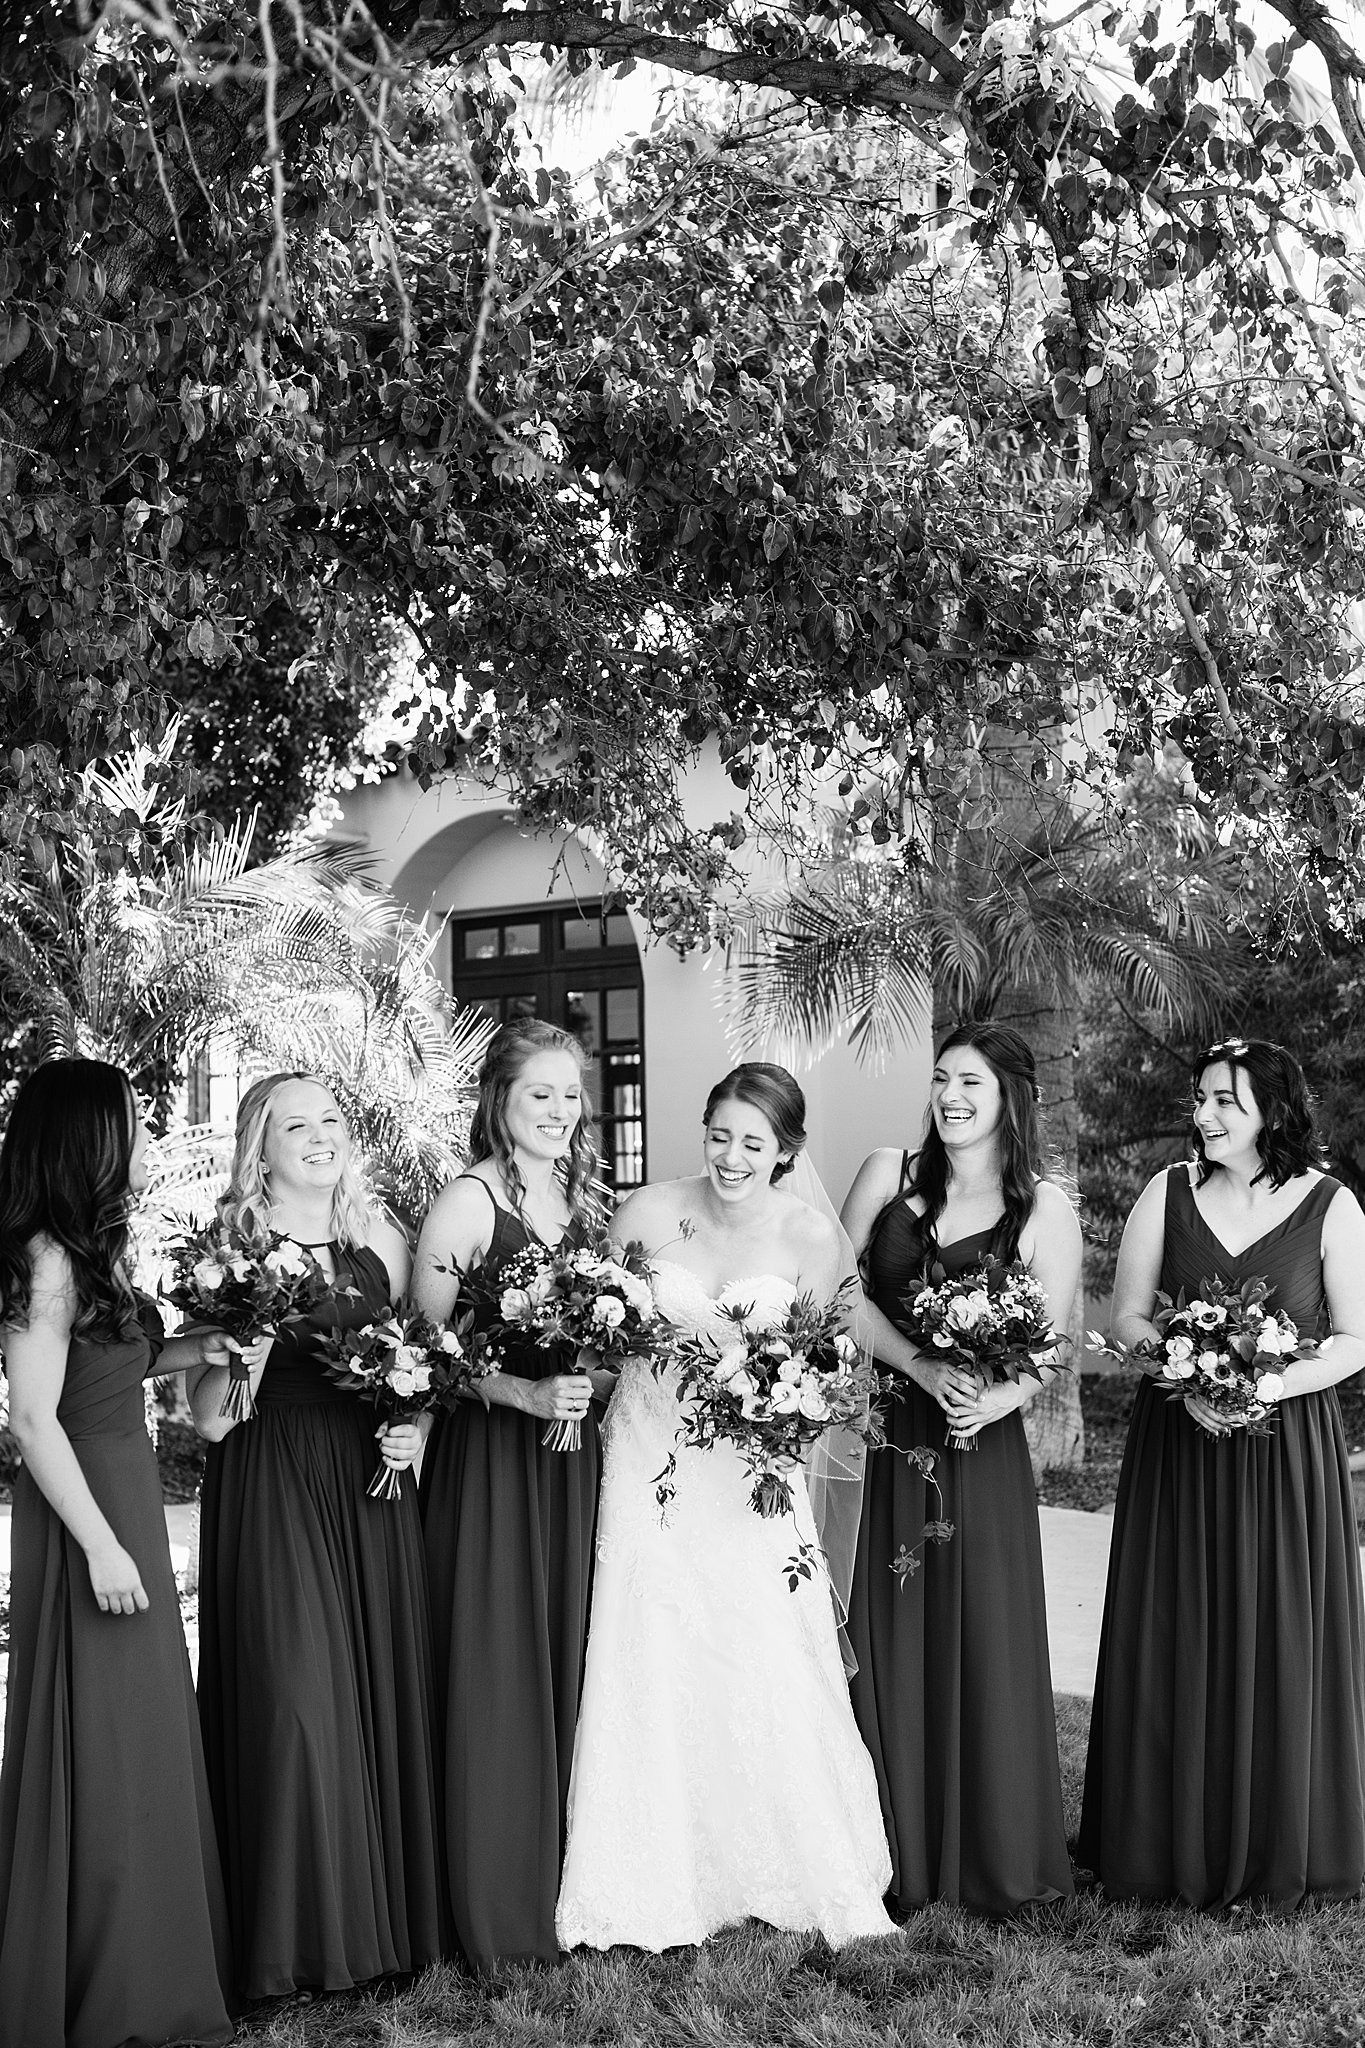 Bride and bridesmaids laughing together at Secret Garden Events wedding by Phoenix wedding photographer PMA Photography.